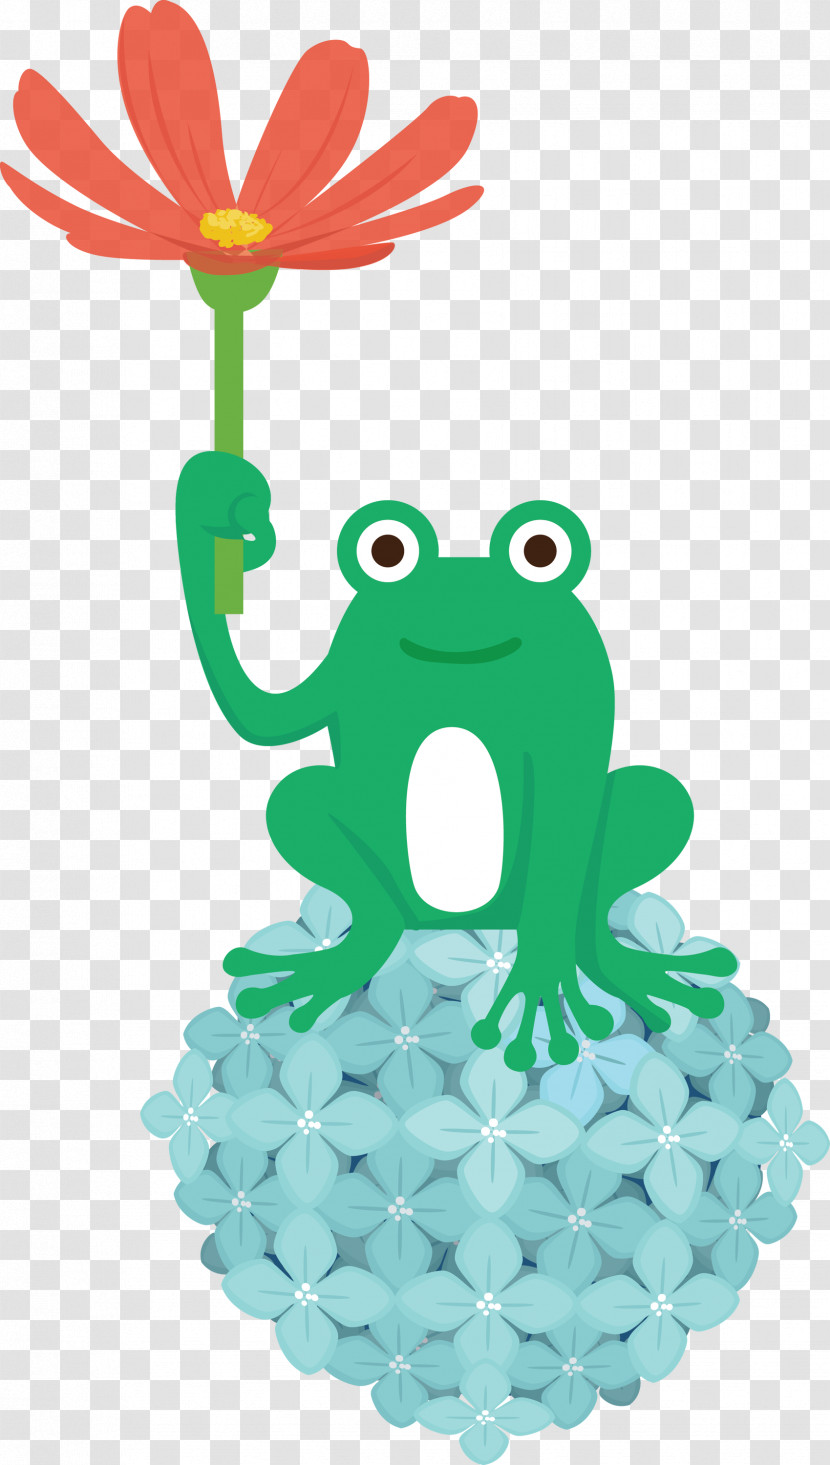 Frogs Cartoon Tree Frog Green Flower Transparent PNG